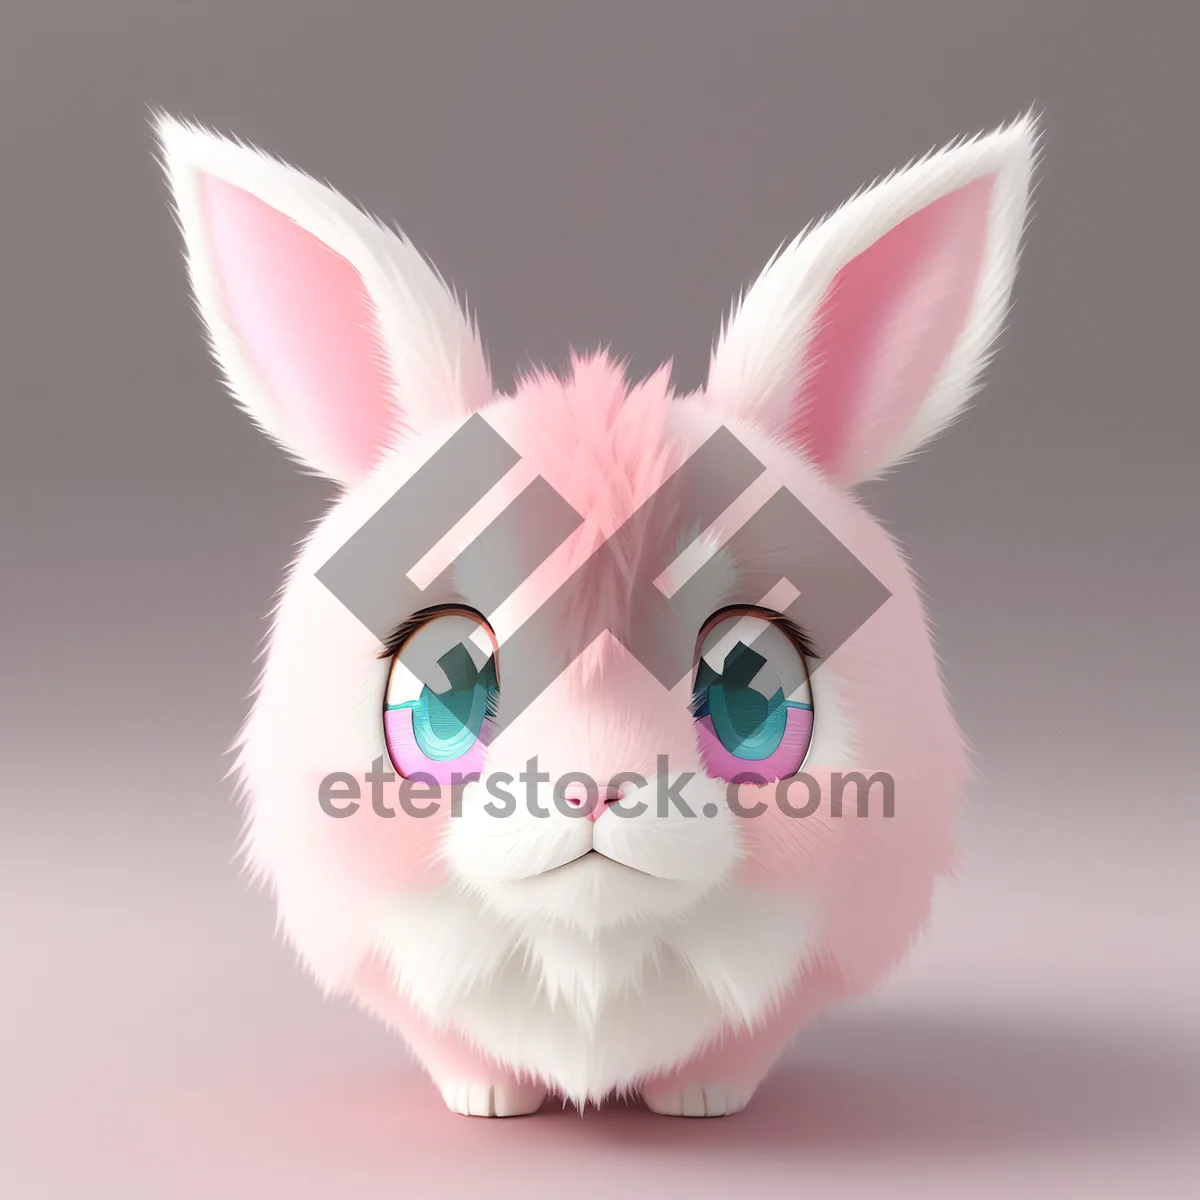 Picture of Cute Piggy Bank Saving Money - Wealthy Bunny Investment